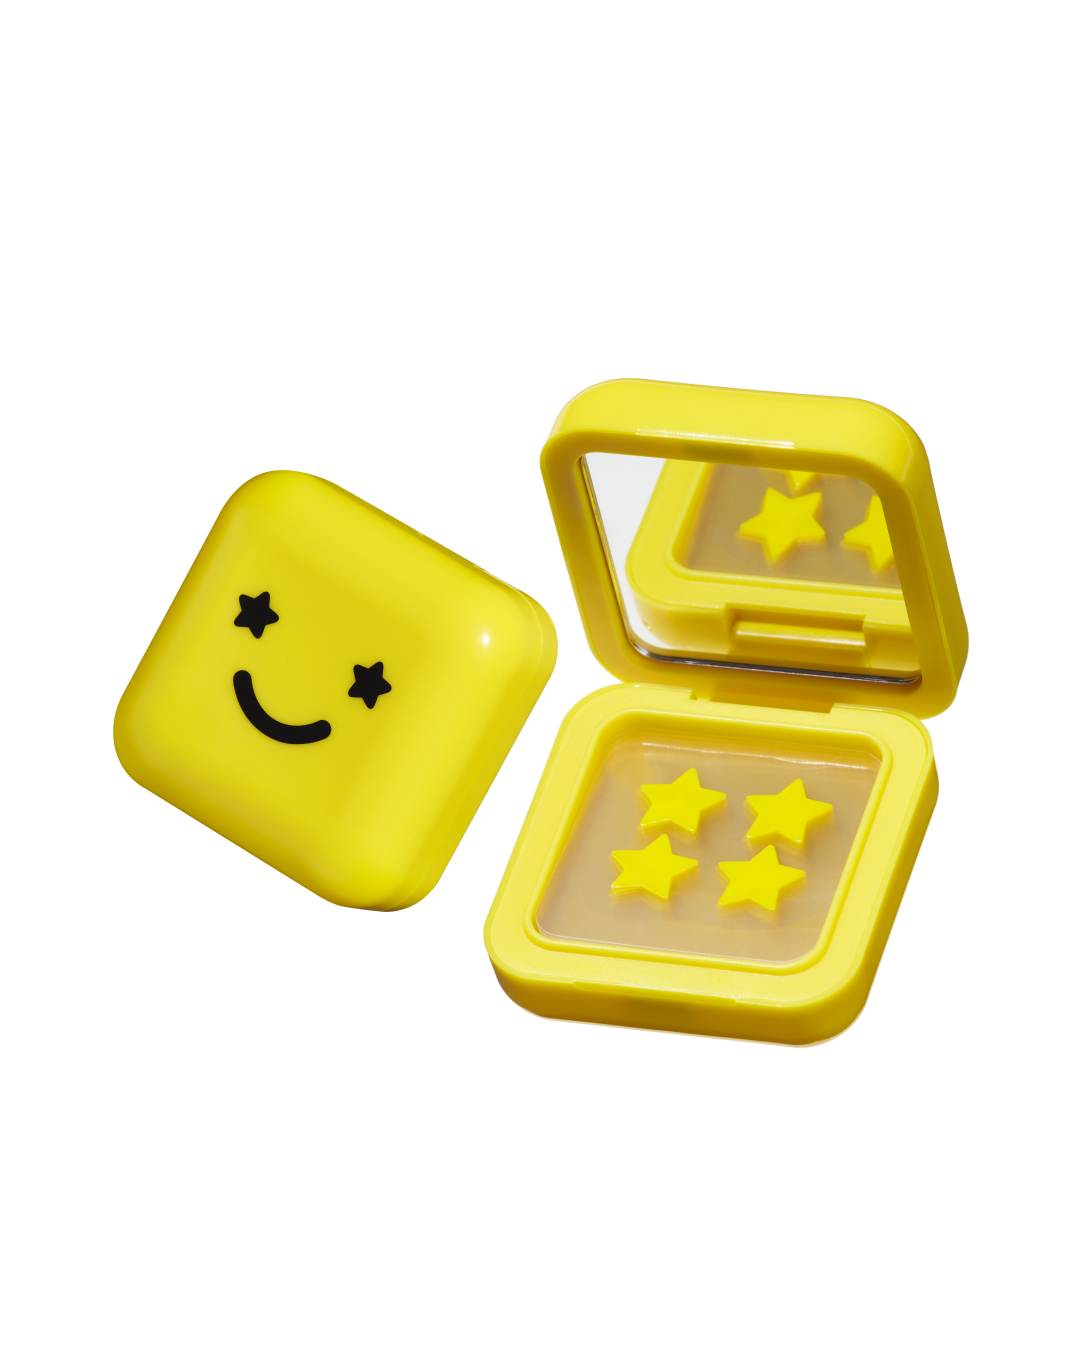 Yellow compact case with a mirror and black smiley face holding Hydro-Star® star-shaped travel pimple patches.